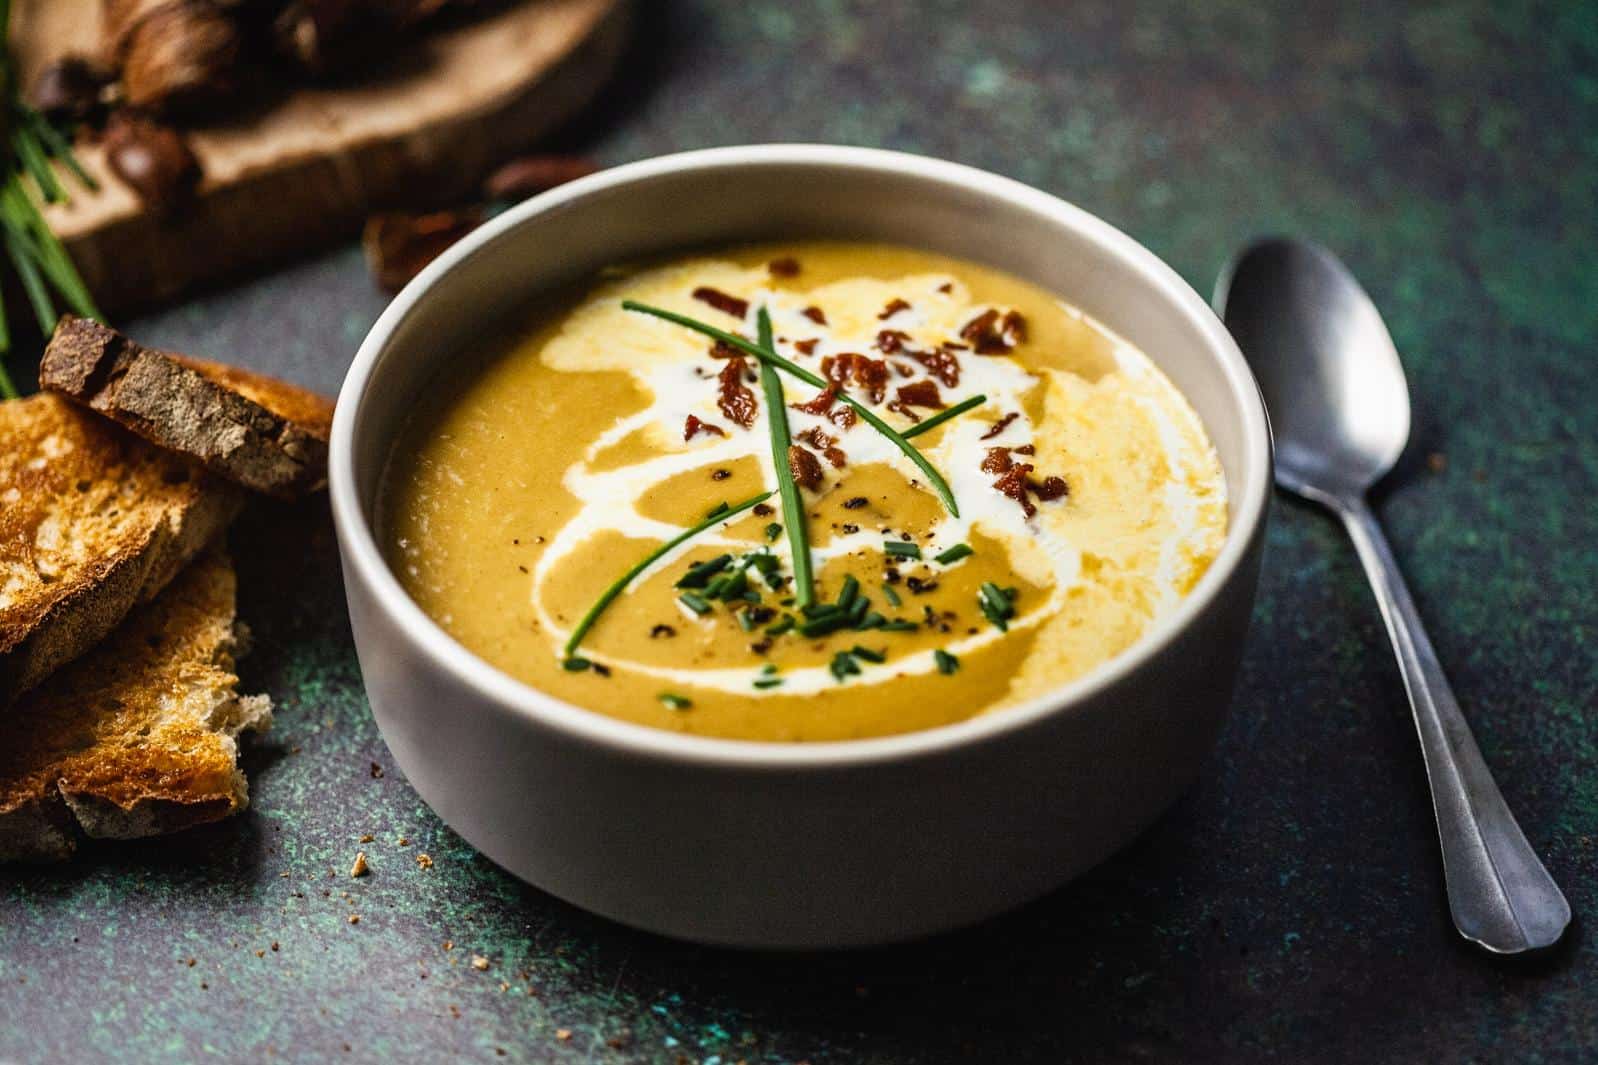  The subtle sweetness of chestnuts adds a unique twist to this classic soup.